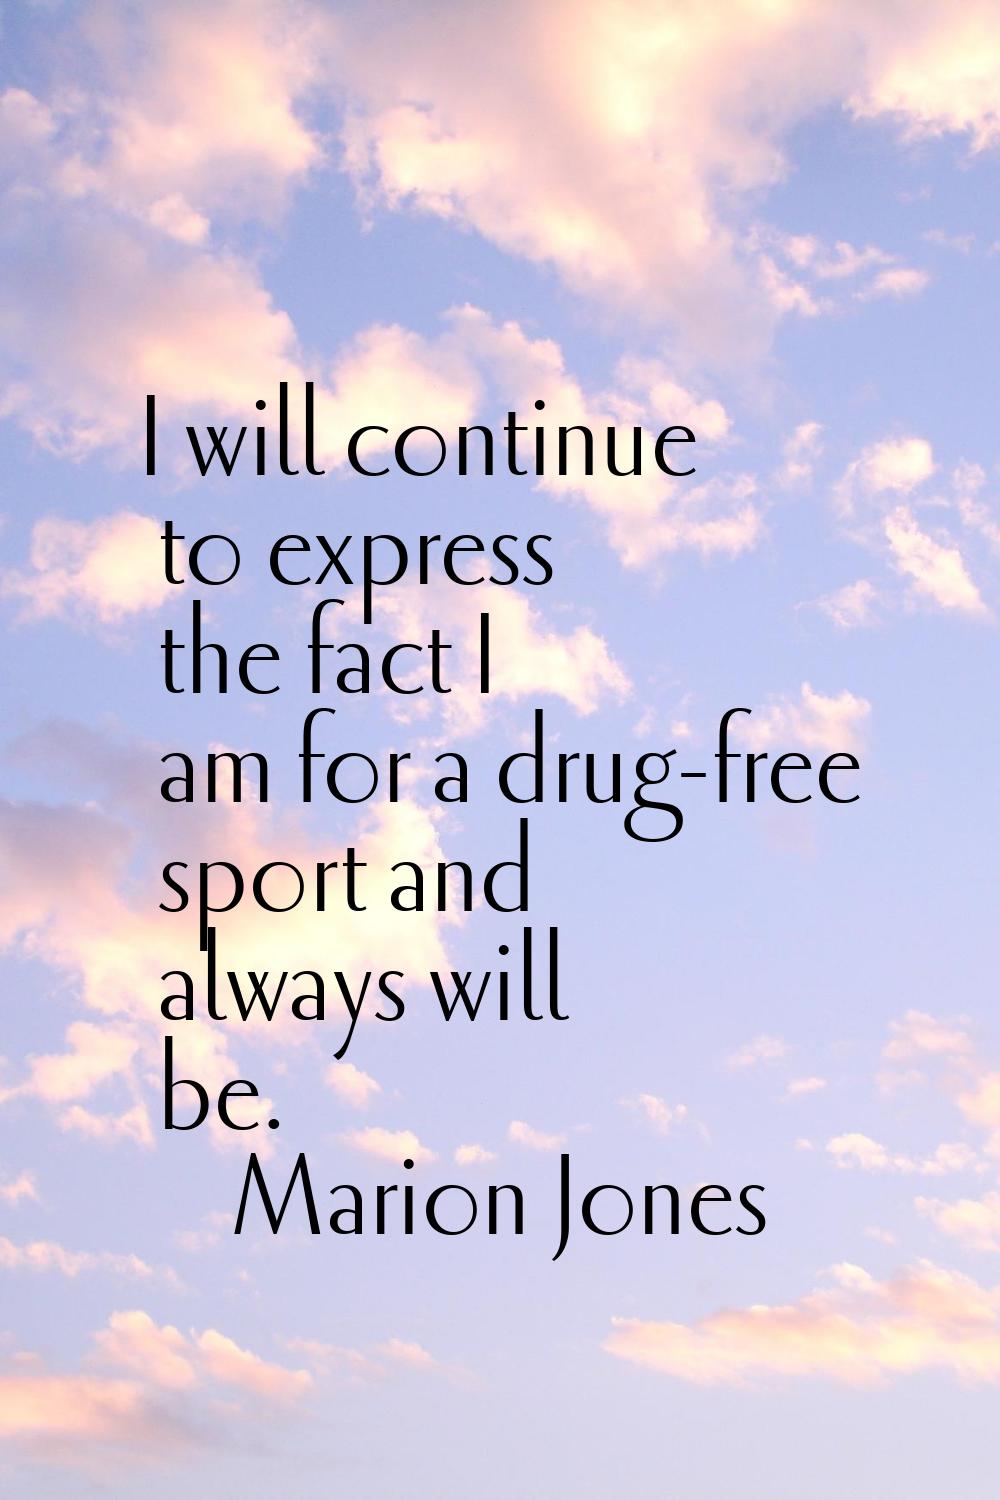 I will continue to express the fact I am for a drug-free sport and always will be.